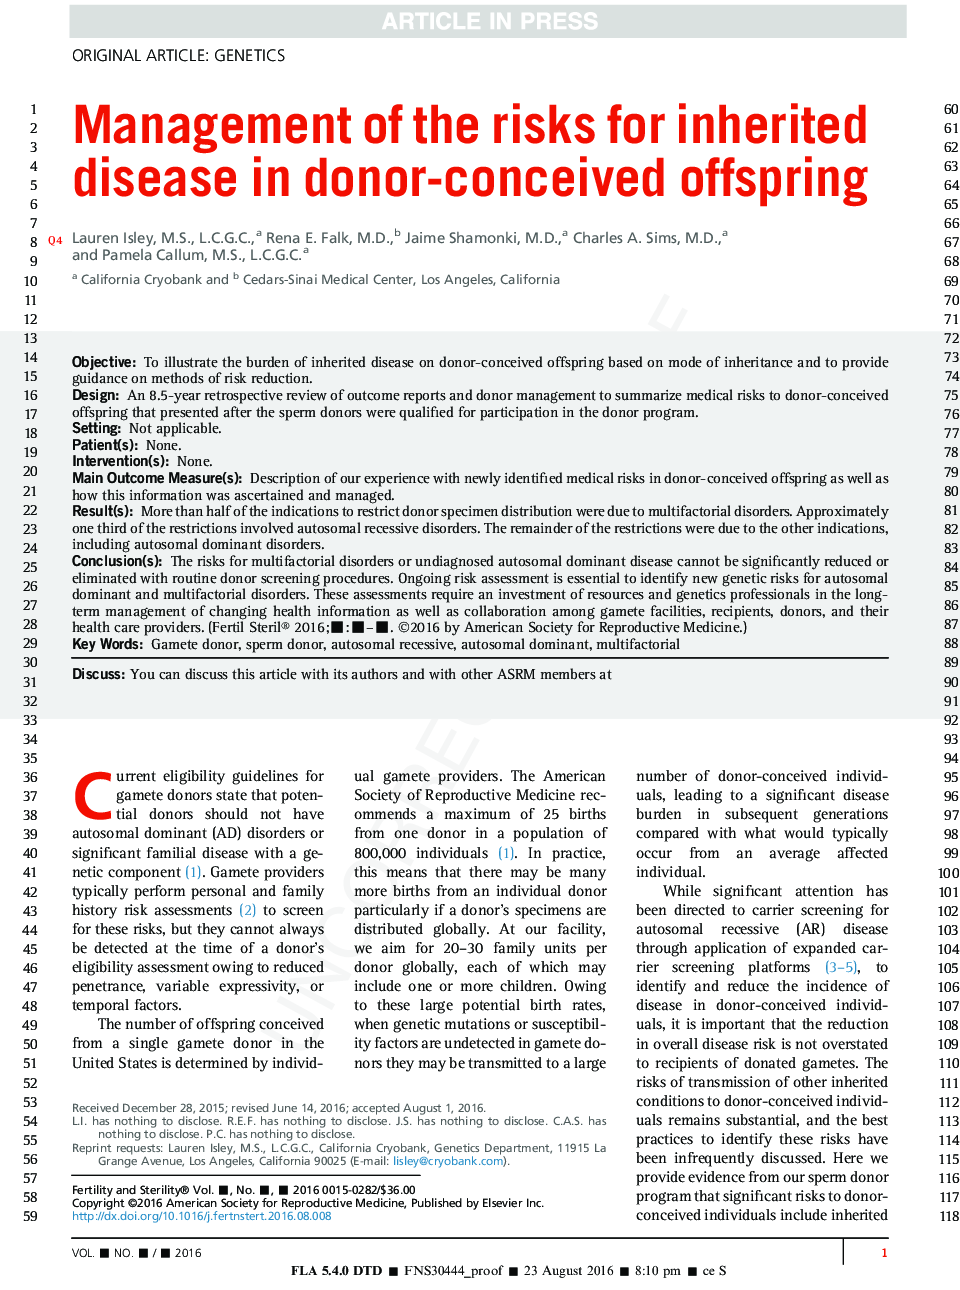 Management of the risks for inherited disease in donor-conceived offspring